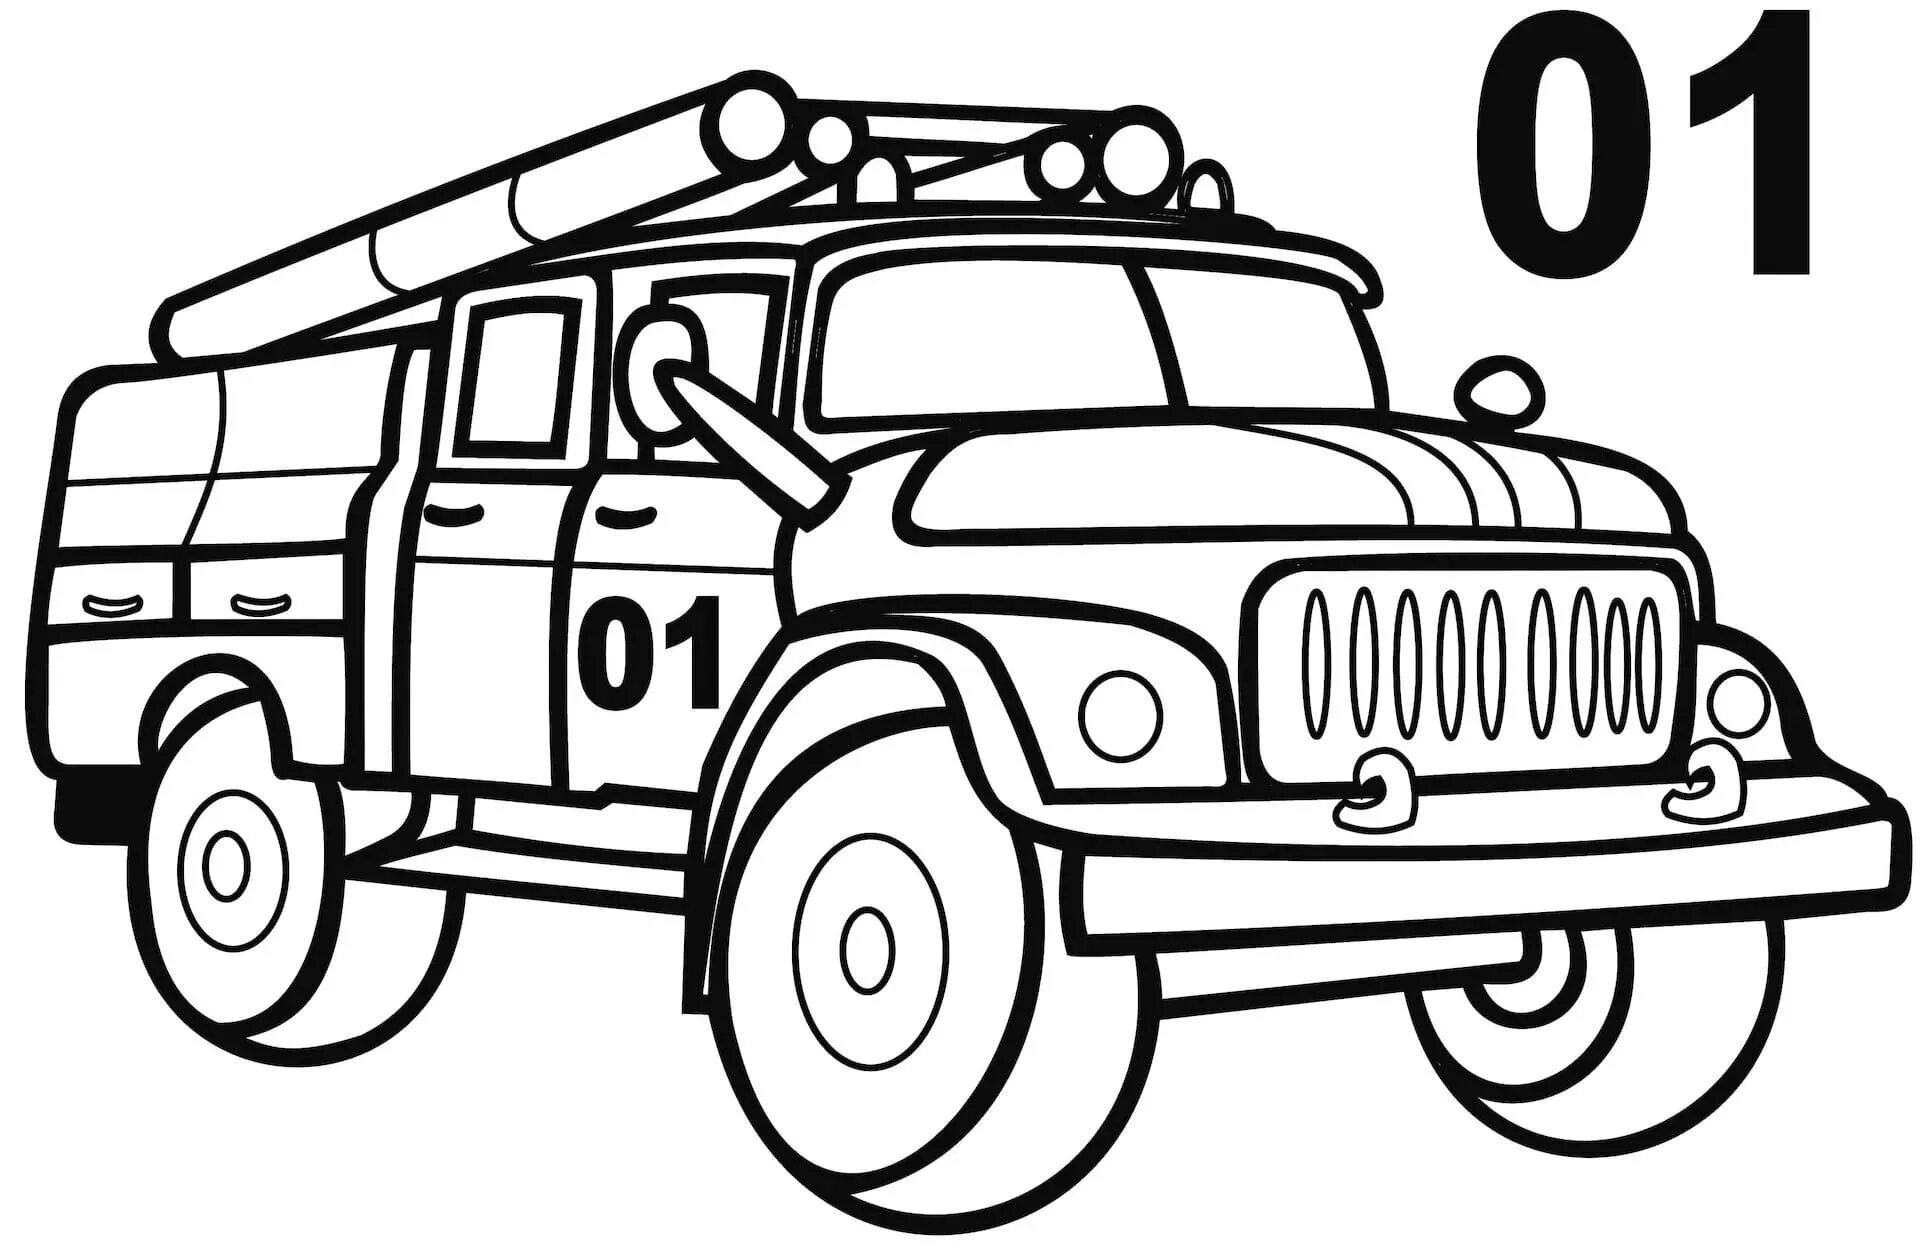 Charming fire truck coloring page